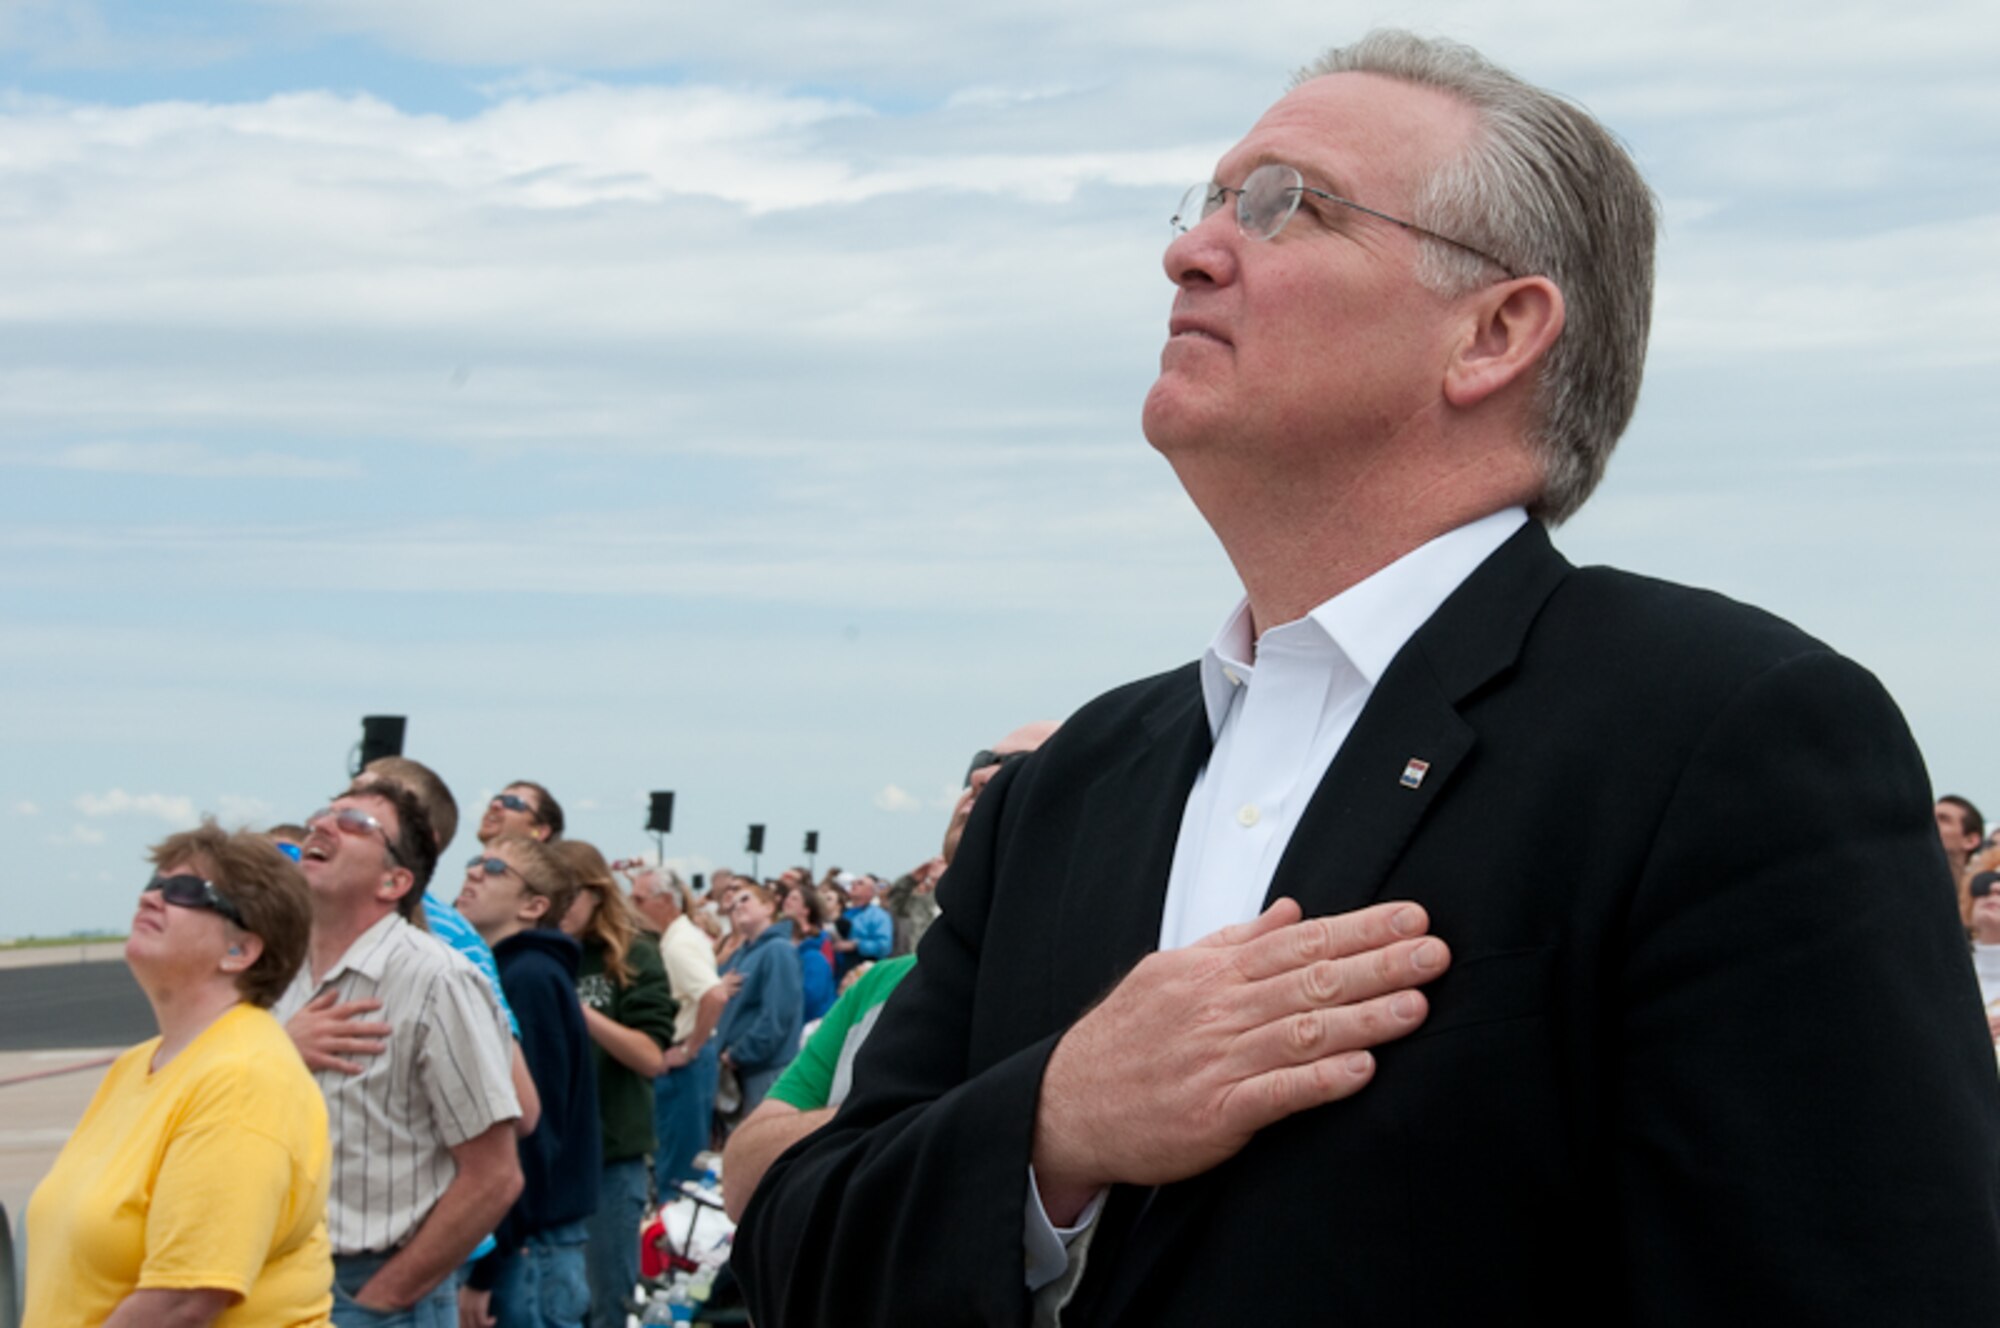 On Sunday, May 2nd, 2010 the govenor of Missouri, Jay Nixon, and the Adjudent General of Missouri National Guard, Steven Danner, pay a visit to the 139th Airlift Wing, in St. Joseph, Mo., to see the Sound of Speed Air Show. (Photo by Airman 1st Class Kelsey Stuart/Released)